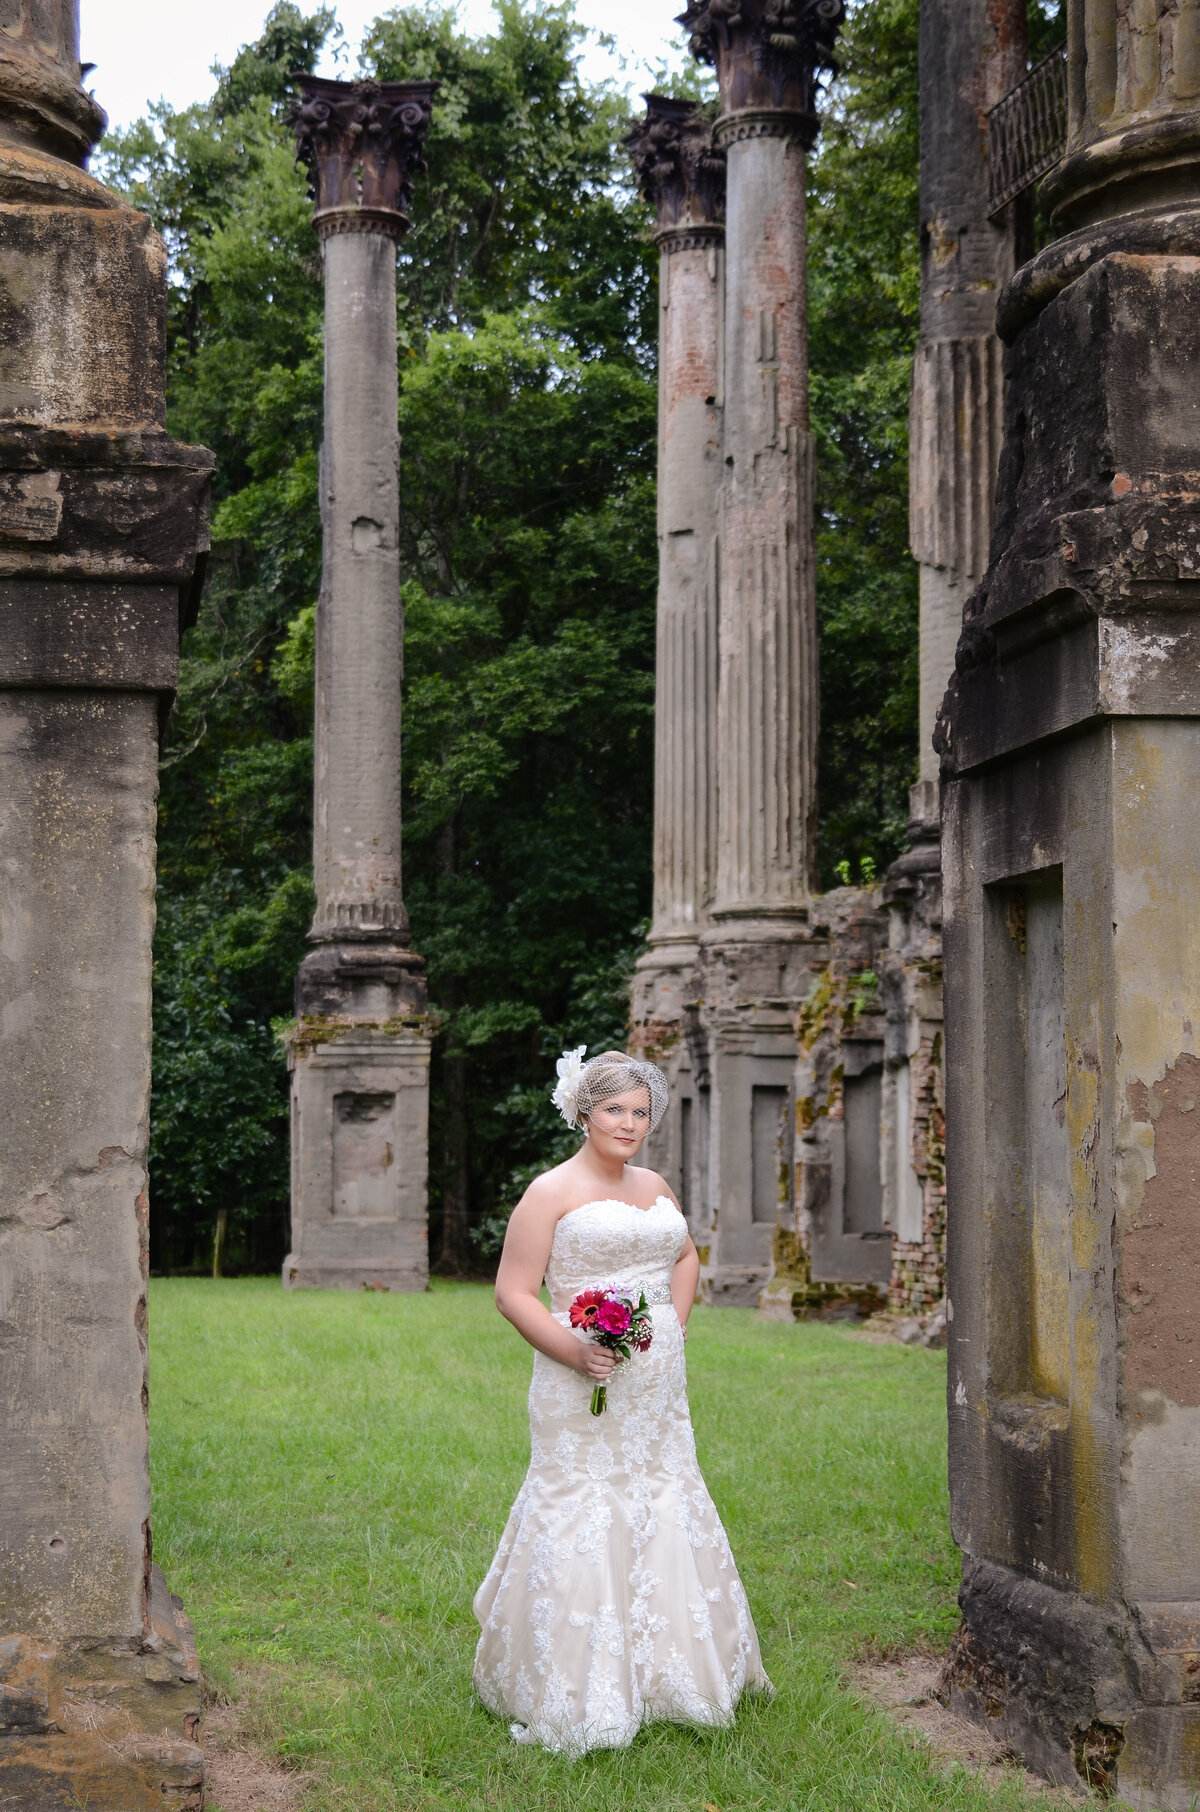 Beautiful bridal portrait photography: bride in vintage gown with birdcage veil among the ruins at Windsor plantation in MS